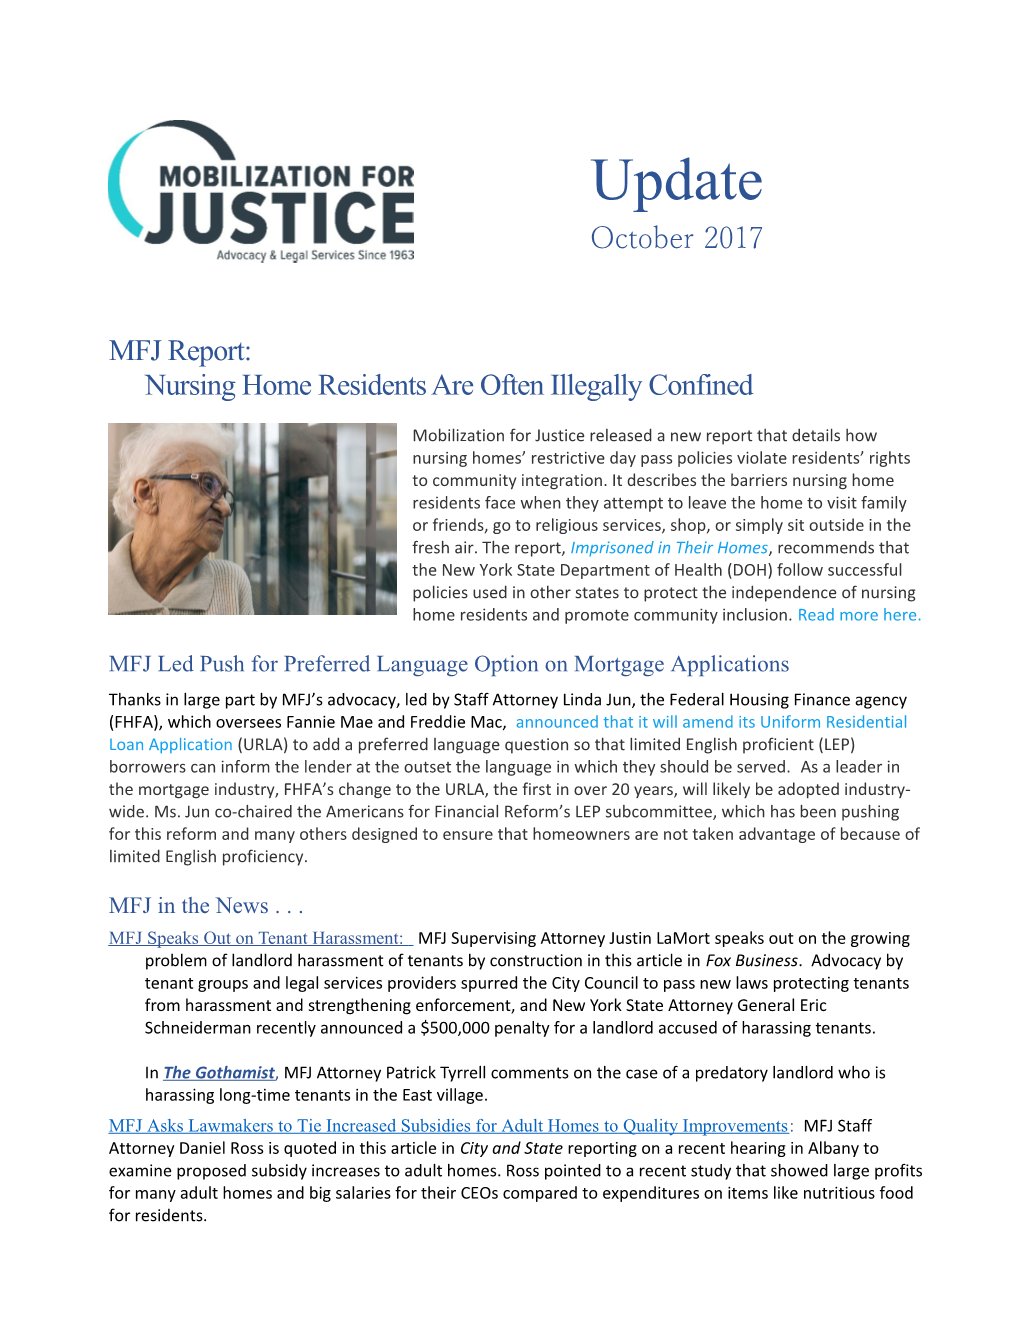 MFJ Report:Nursing Home Residents Are Often Illegally Confined